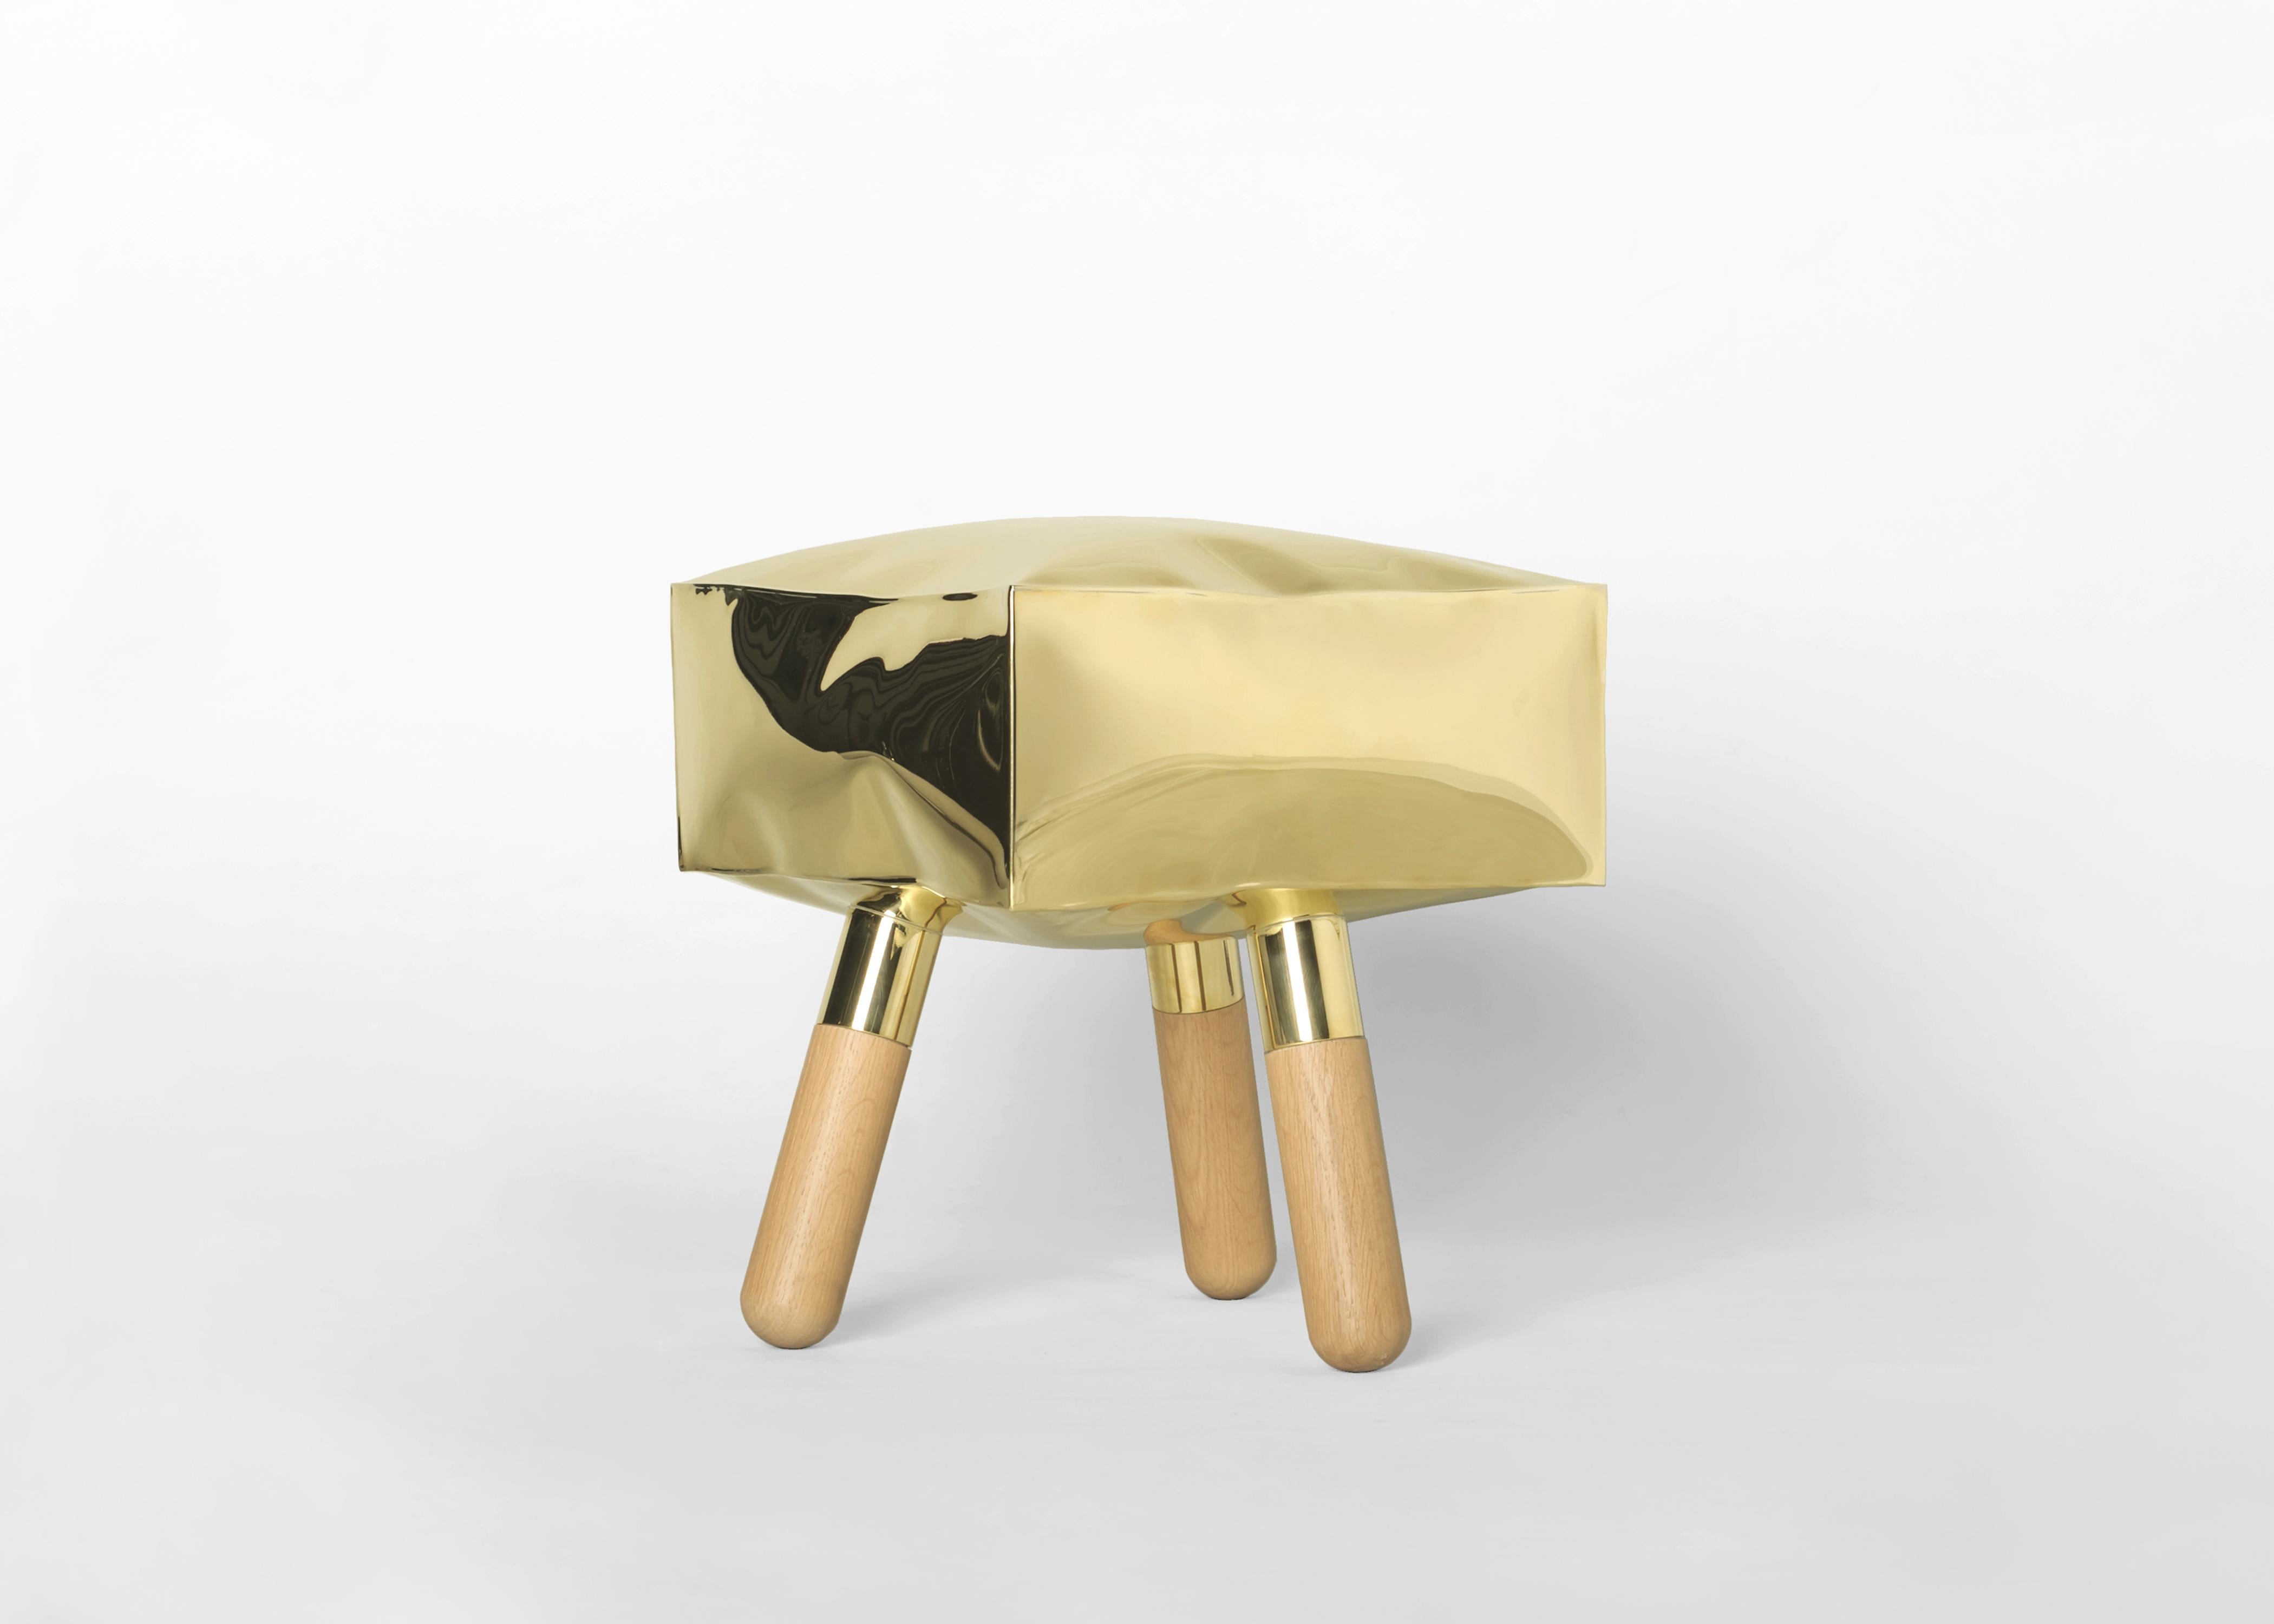 Icenine stool by Edizione Limitata
Limited edition of 15+3 AP pieces. Signed and numbered.
Designers: Simone Fanciullacci, Antonio De Marco
Dimensions: H 41 × W 35 × L 35 cm
Materials: polished brass, solid oakwood

Edizione Limitata, that is